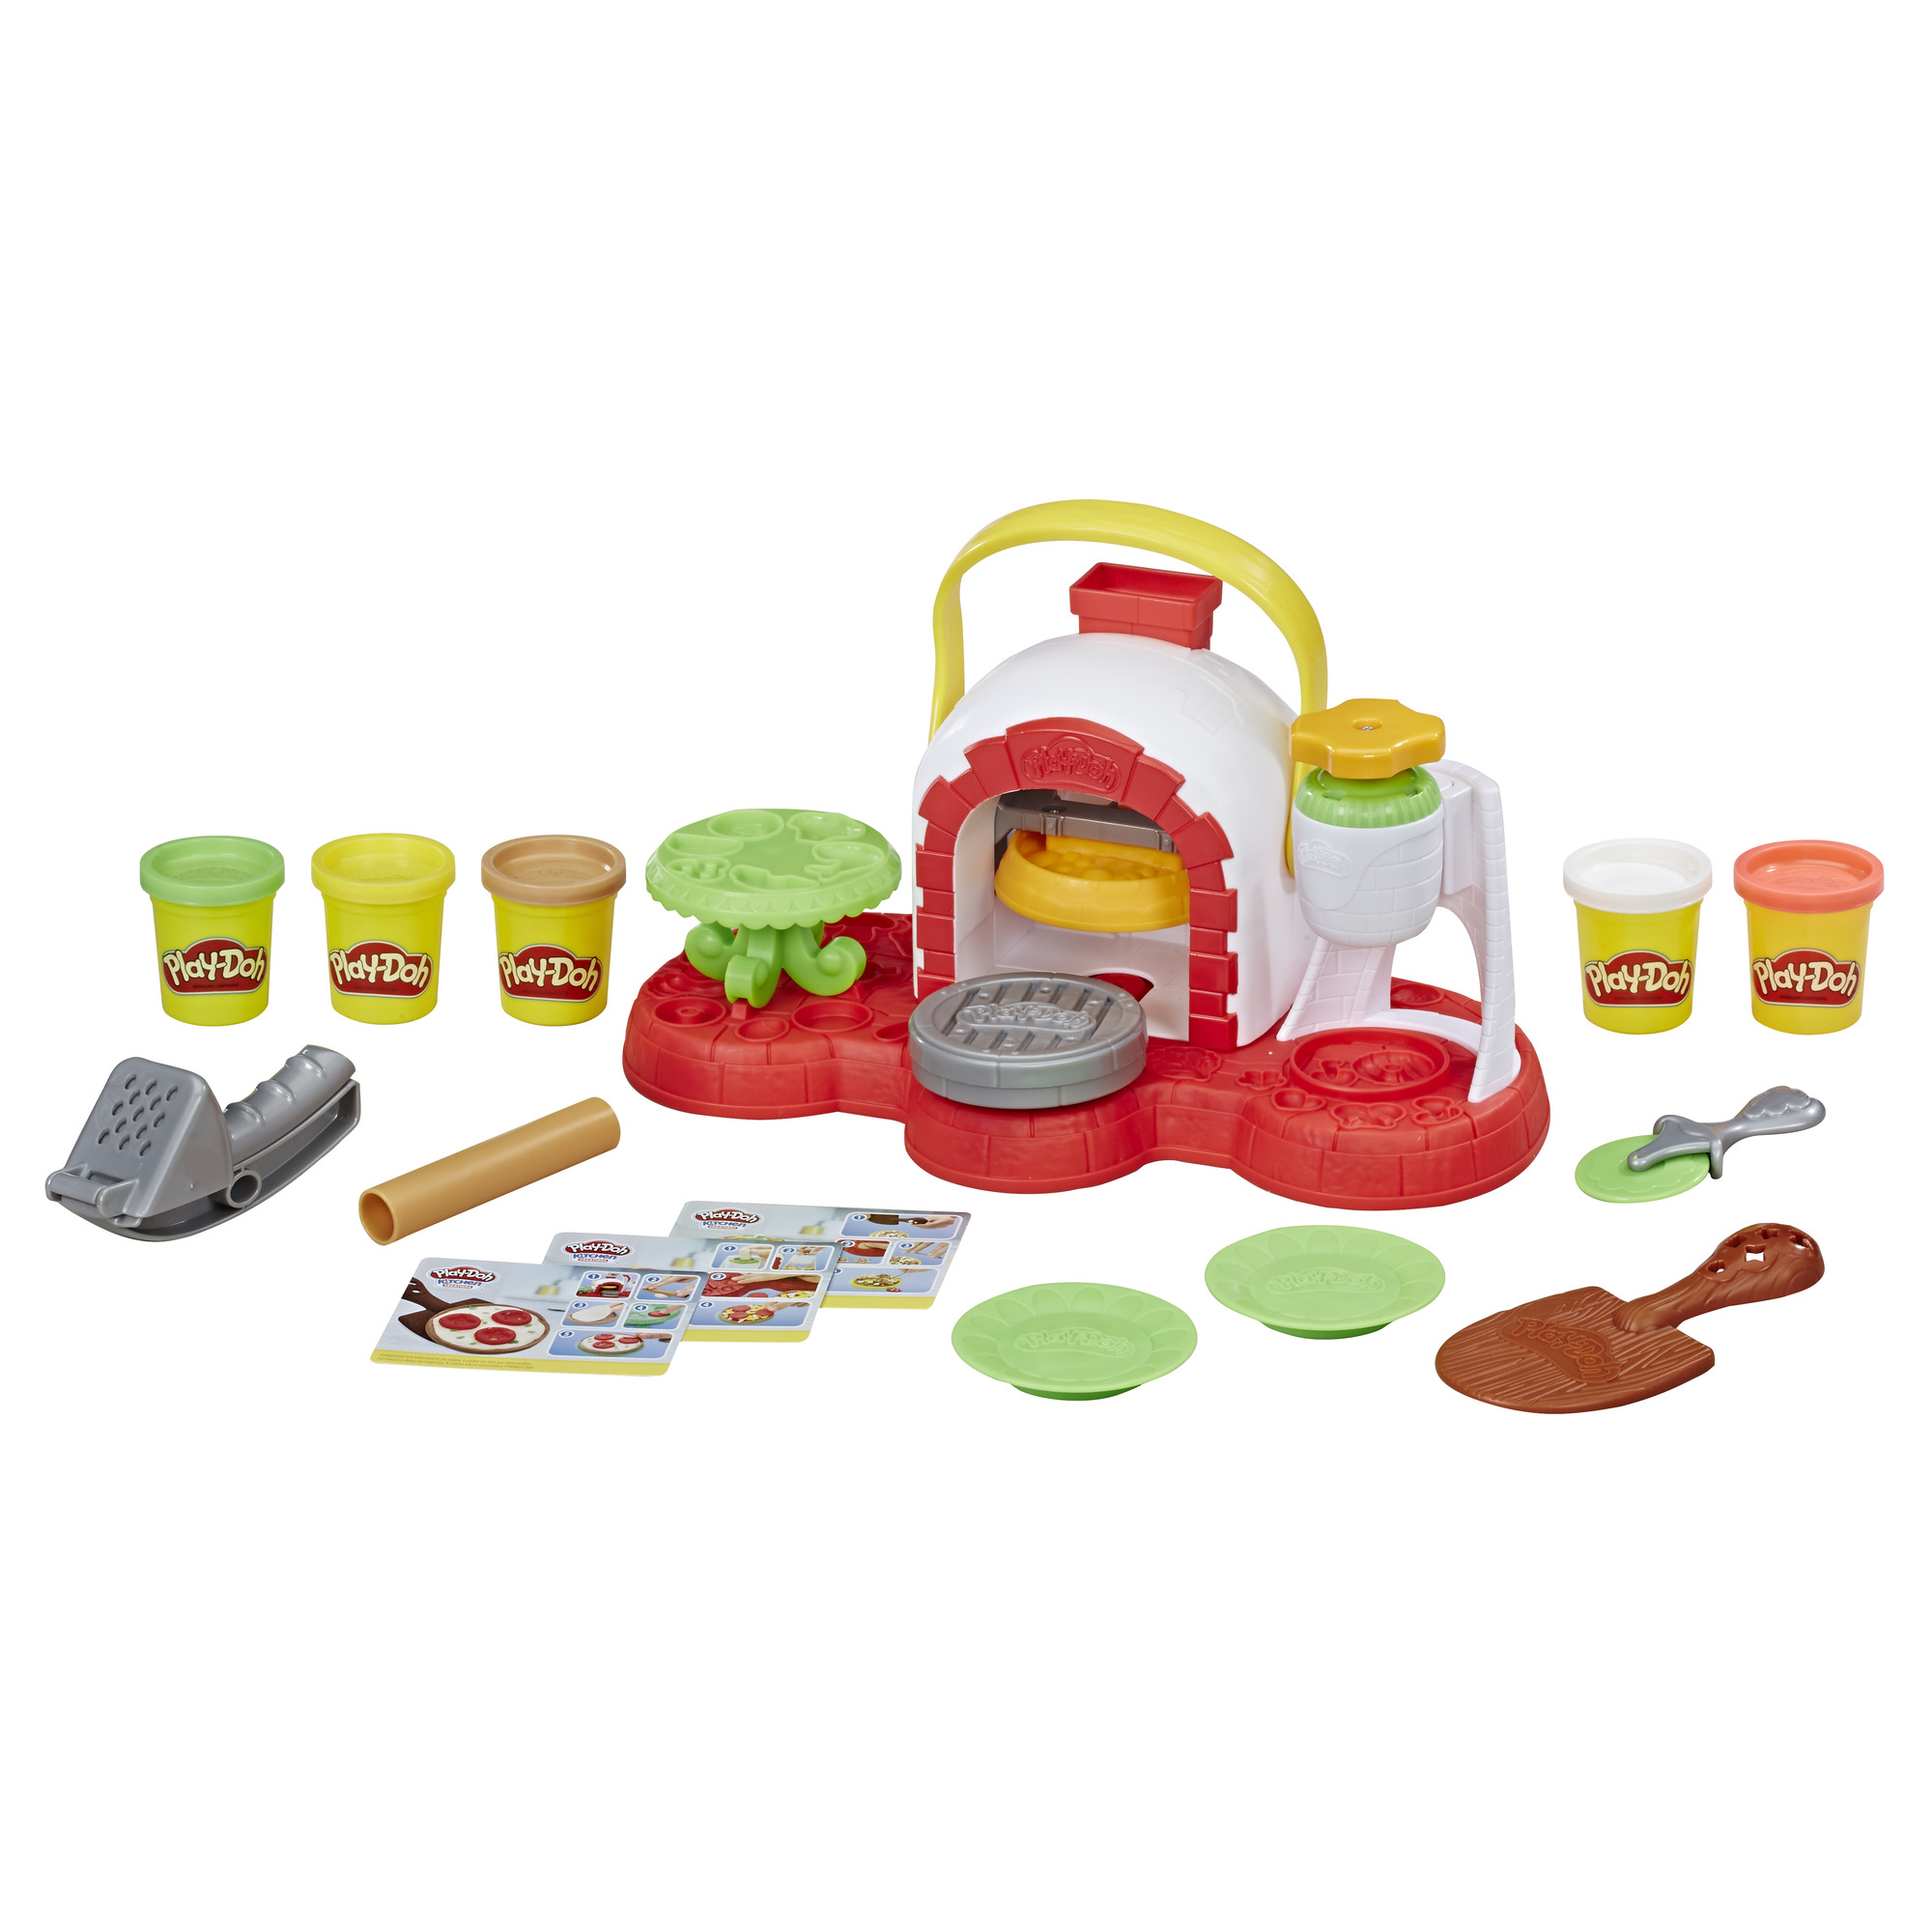 Hasbro Play-Doh Stamp 'n Top Pizza Oven Toy E4576 for sale online 